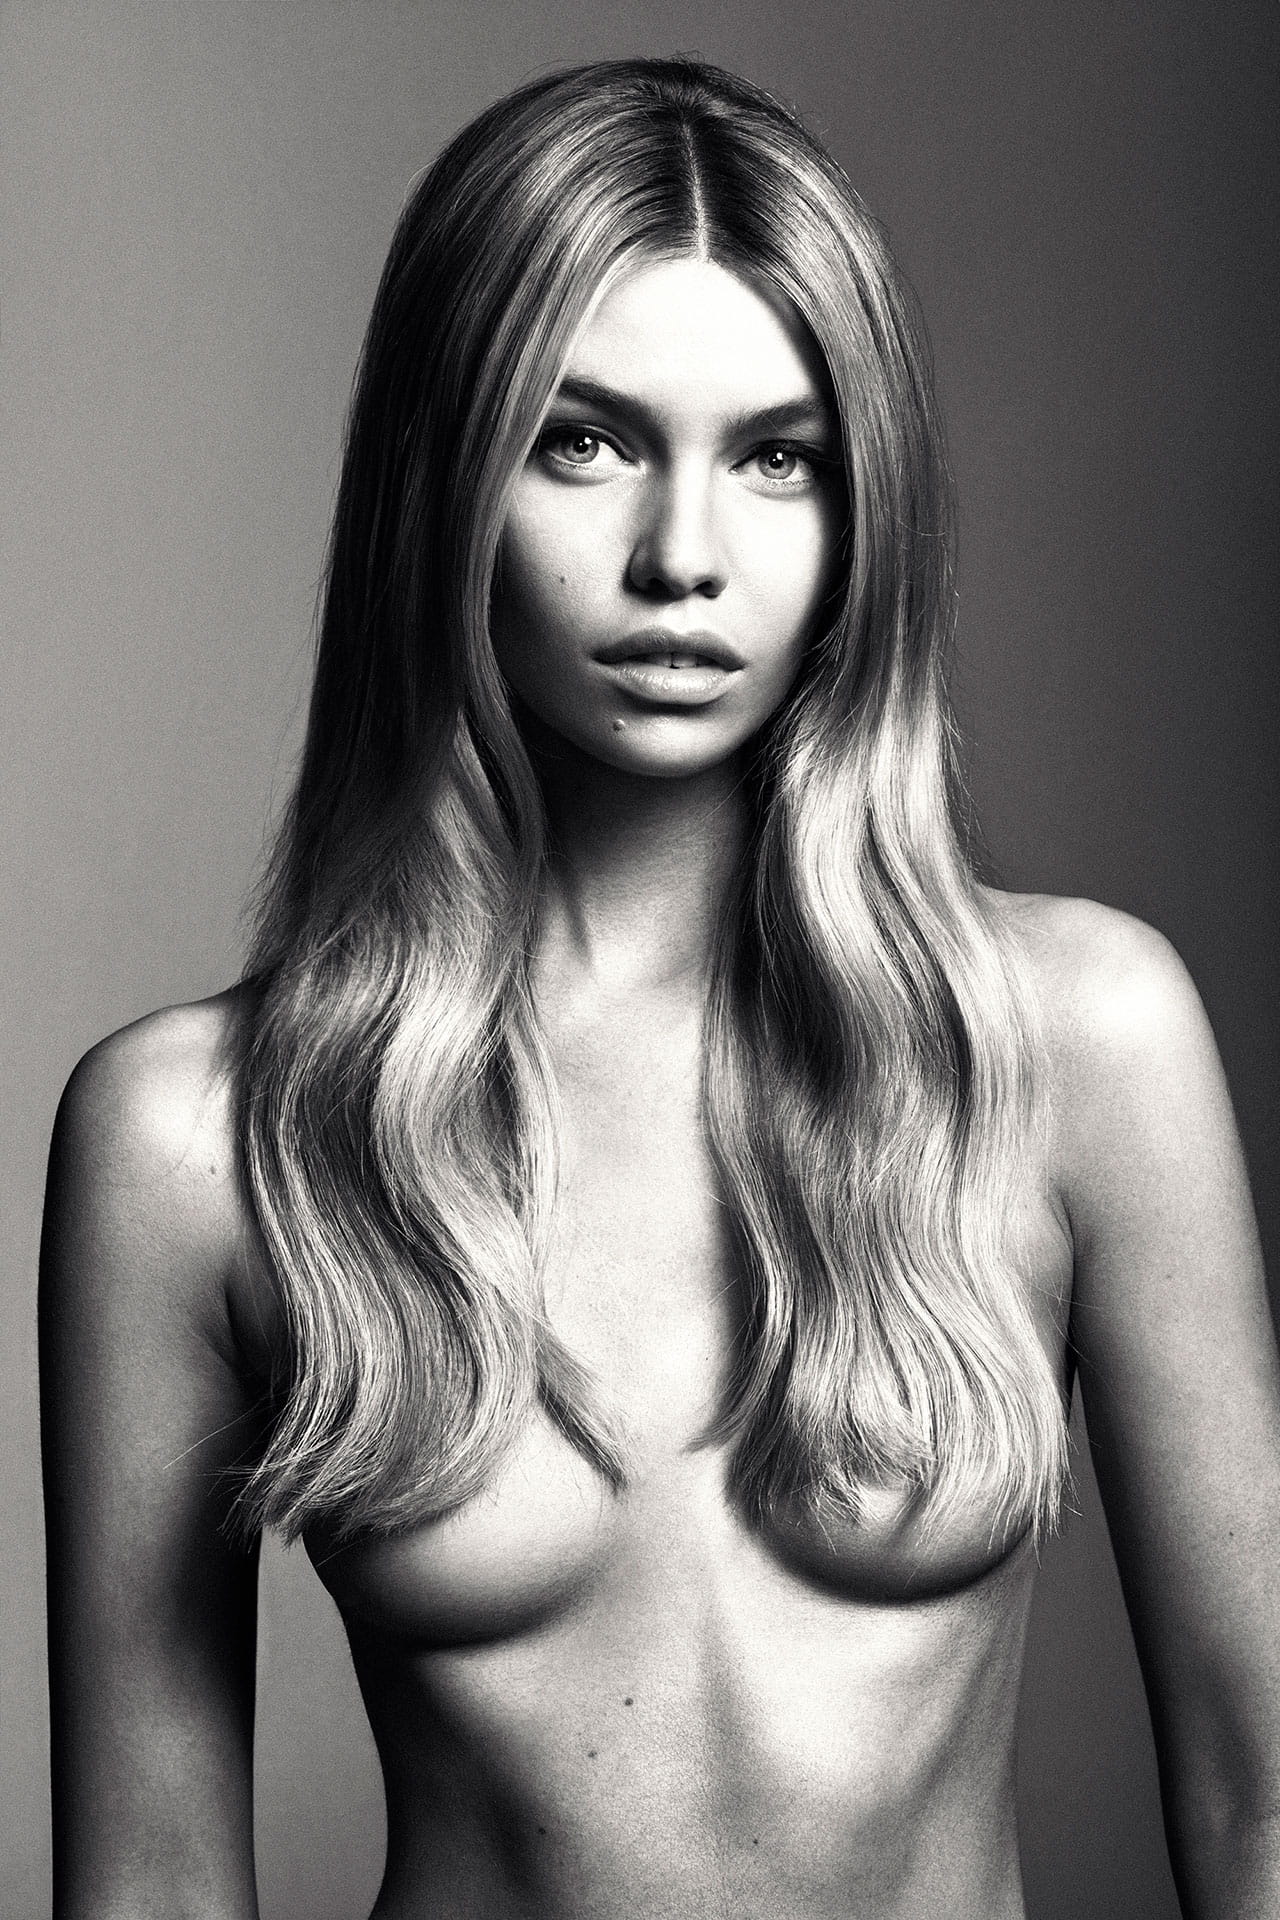 Stella Maxwell by Rowan Papier for Models.com Angels Undressed